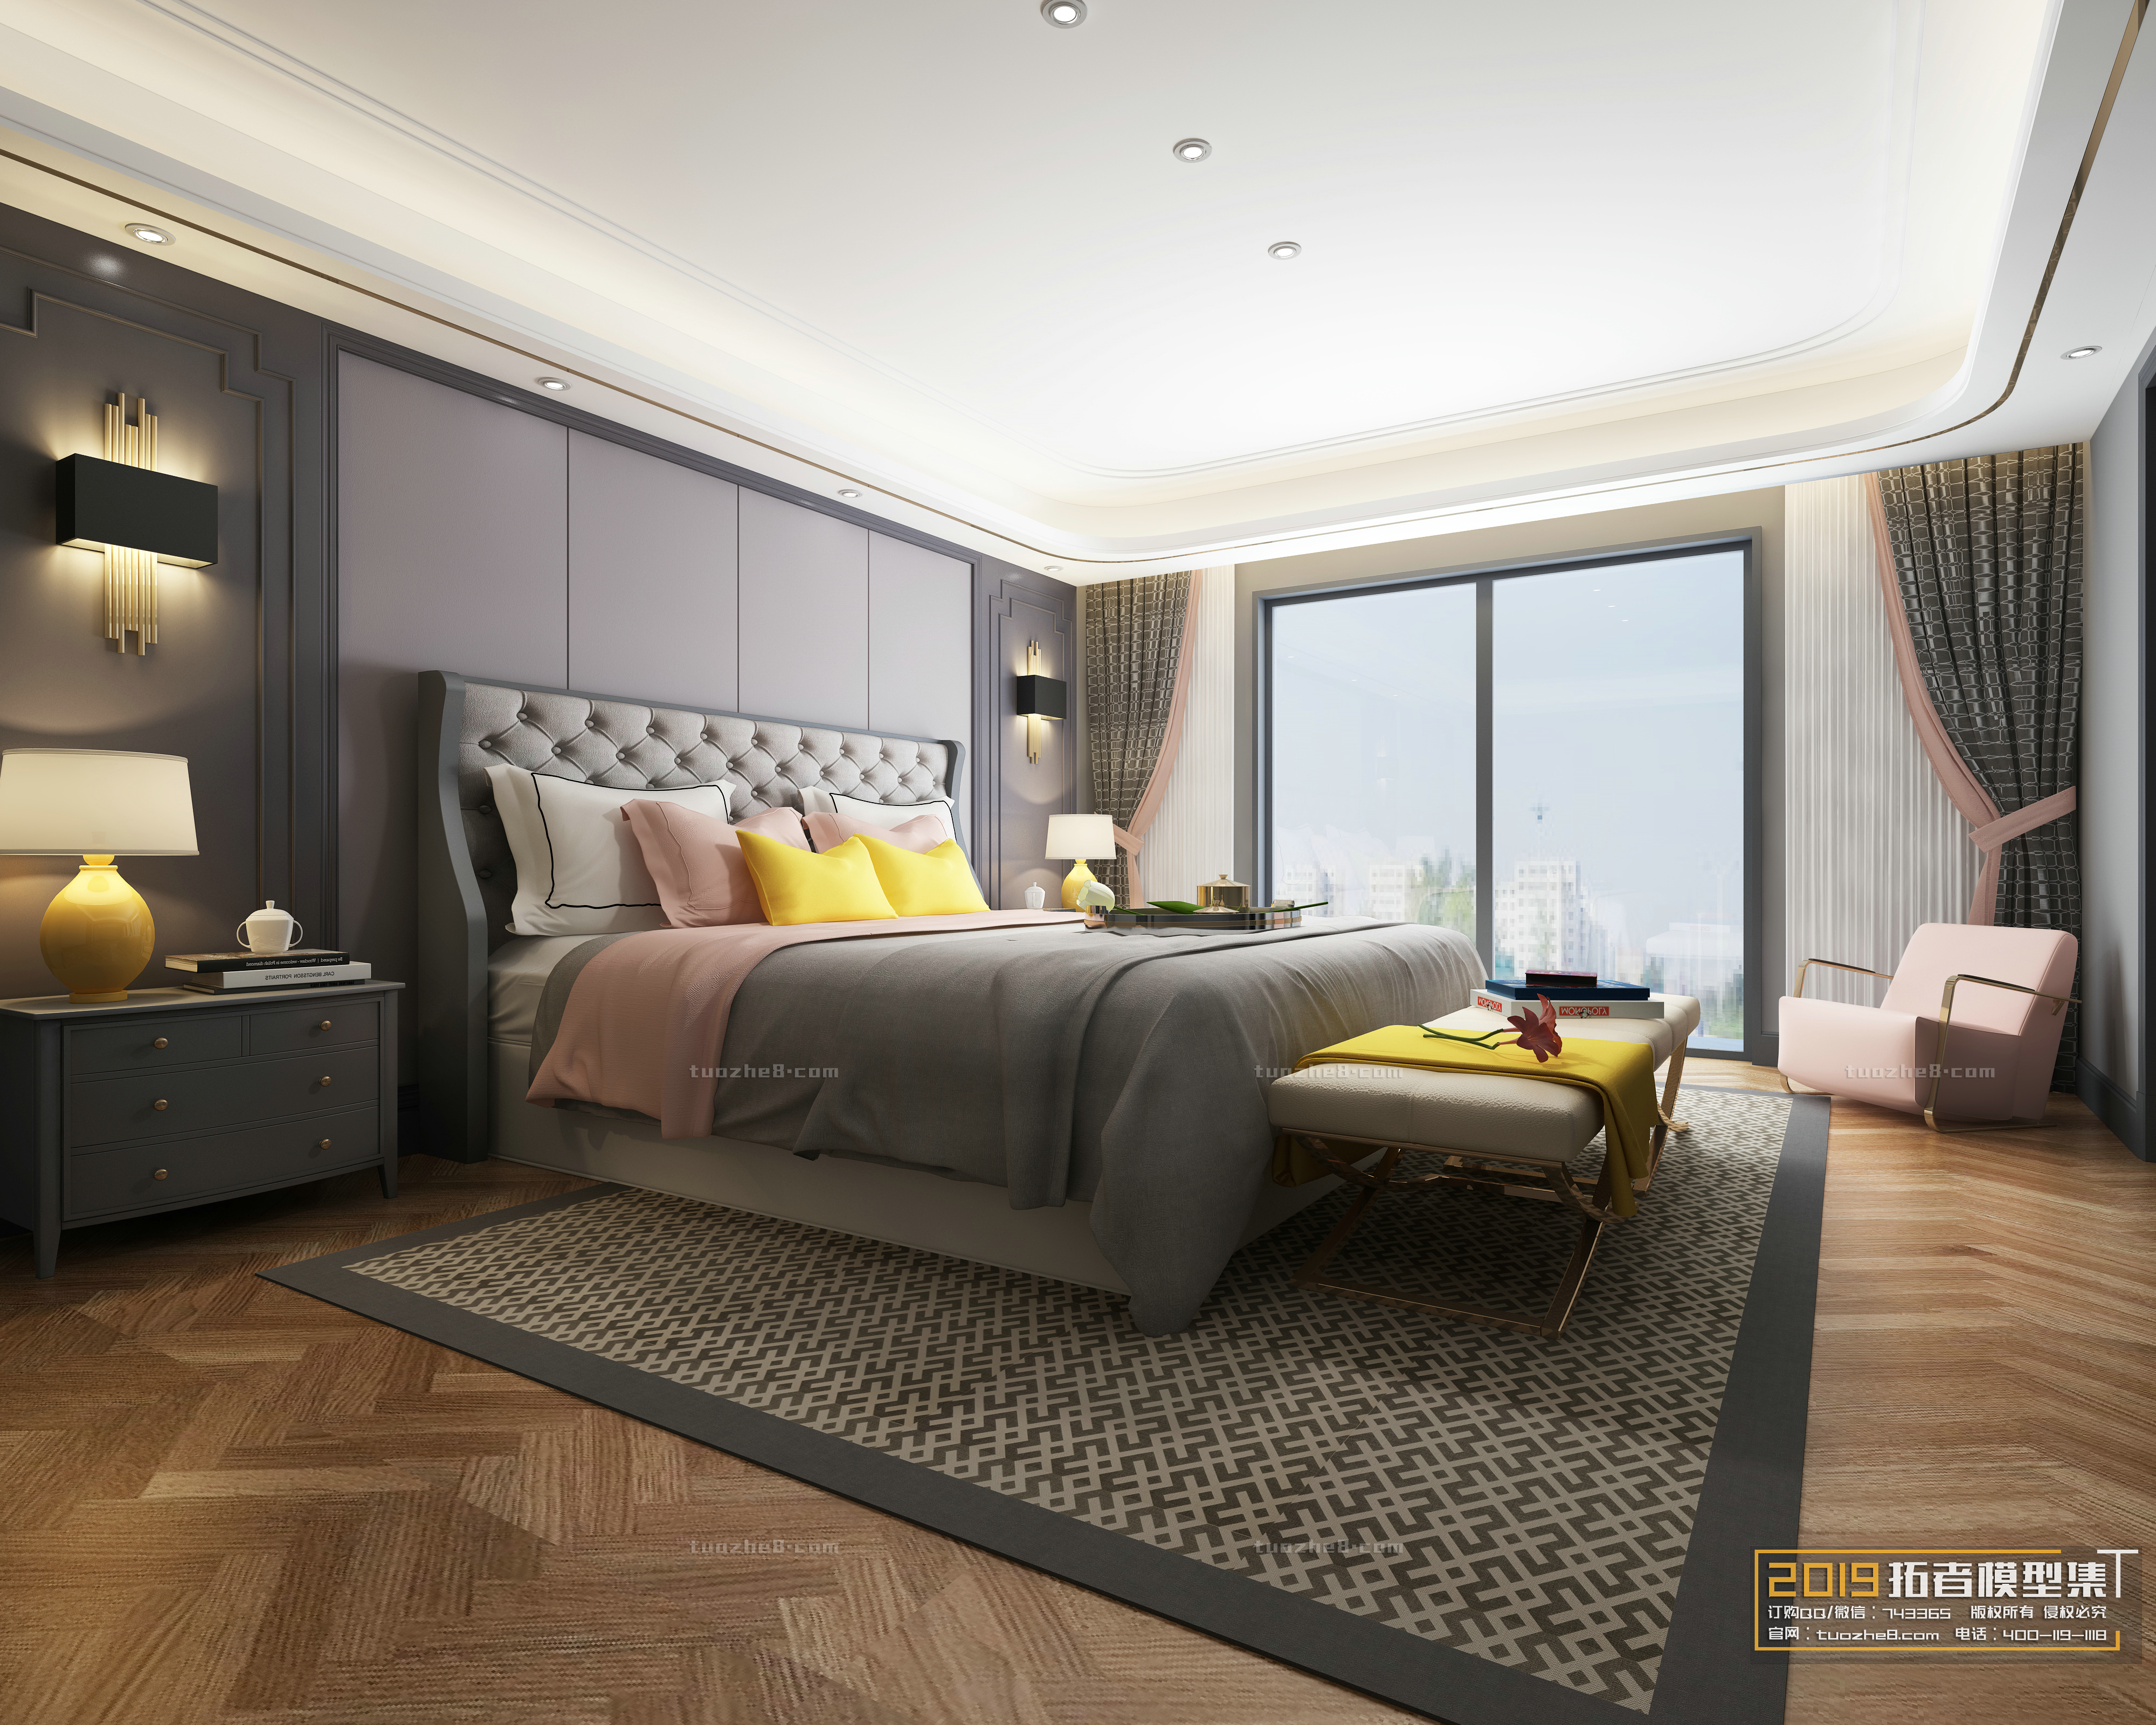 Extension Interior – BEDROOM – AMERICAN STYLES – 005 - thumbnail 1